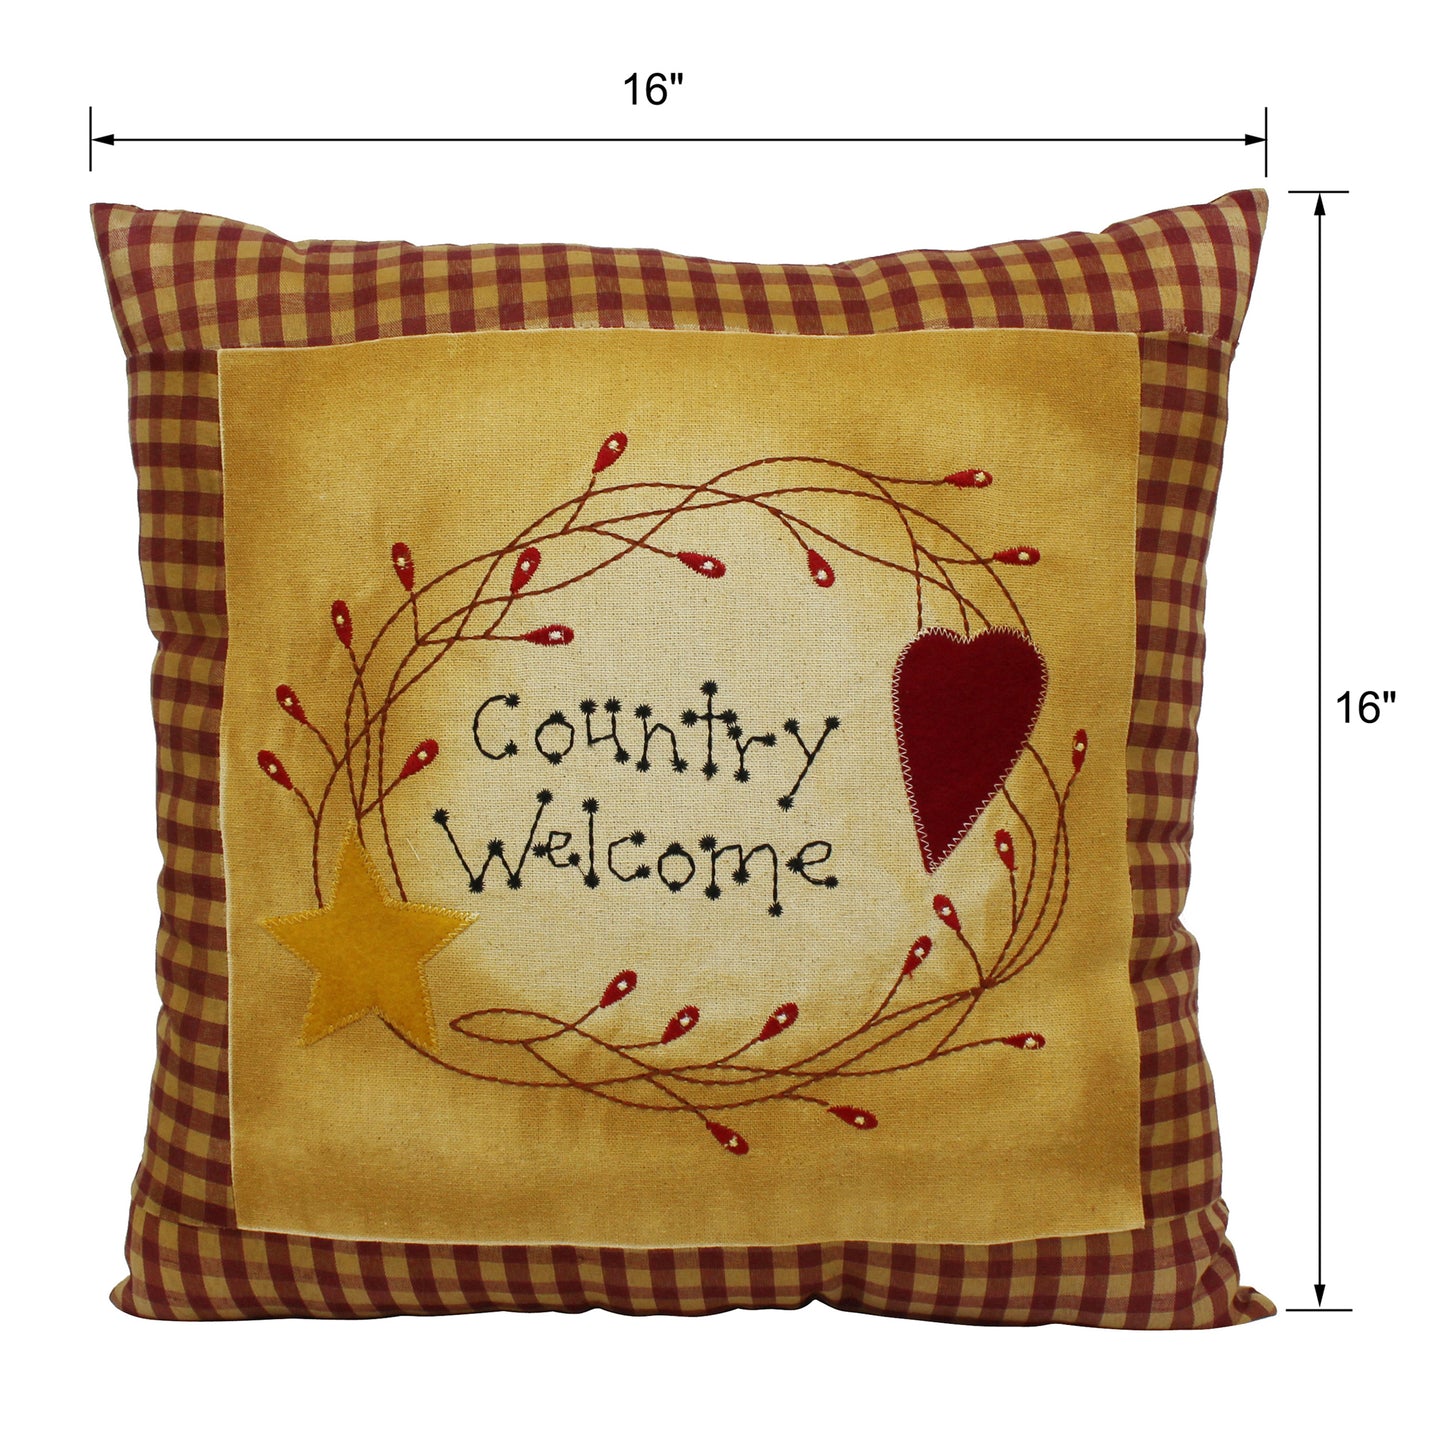 CVHOMEDECO. Primitives Country Welcome Embroidered Throw Pillow with Heart Star Berry Vine Farmhouse Accent. 16 x 16 Inch